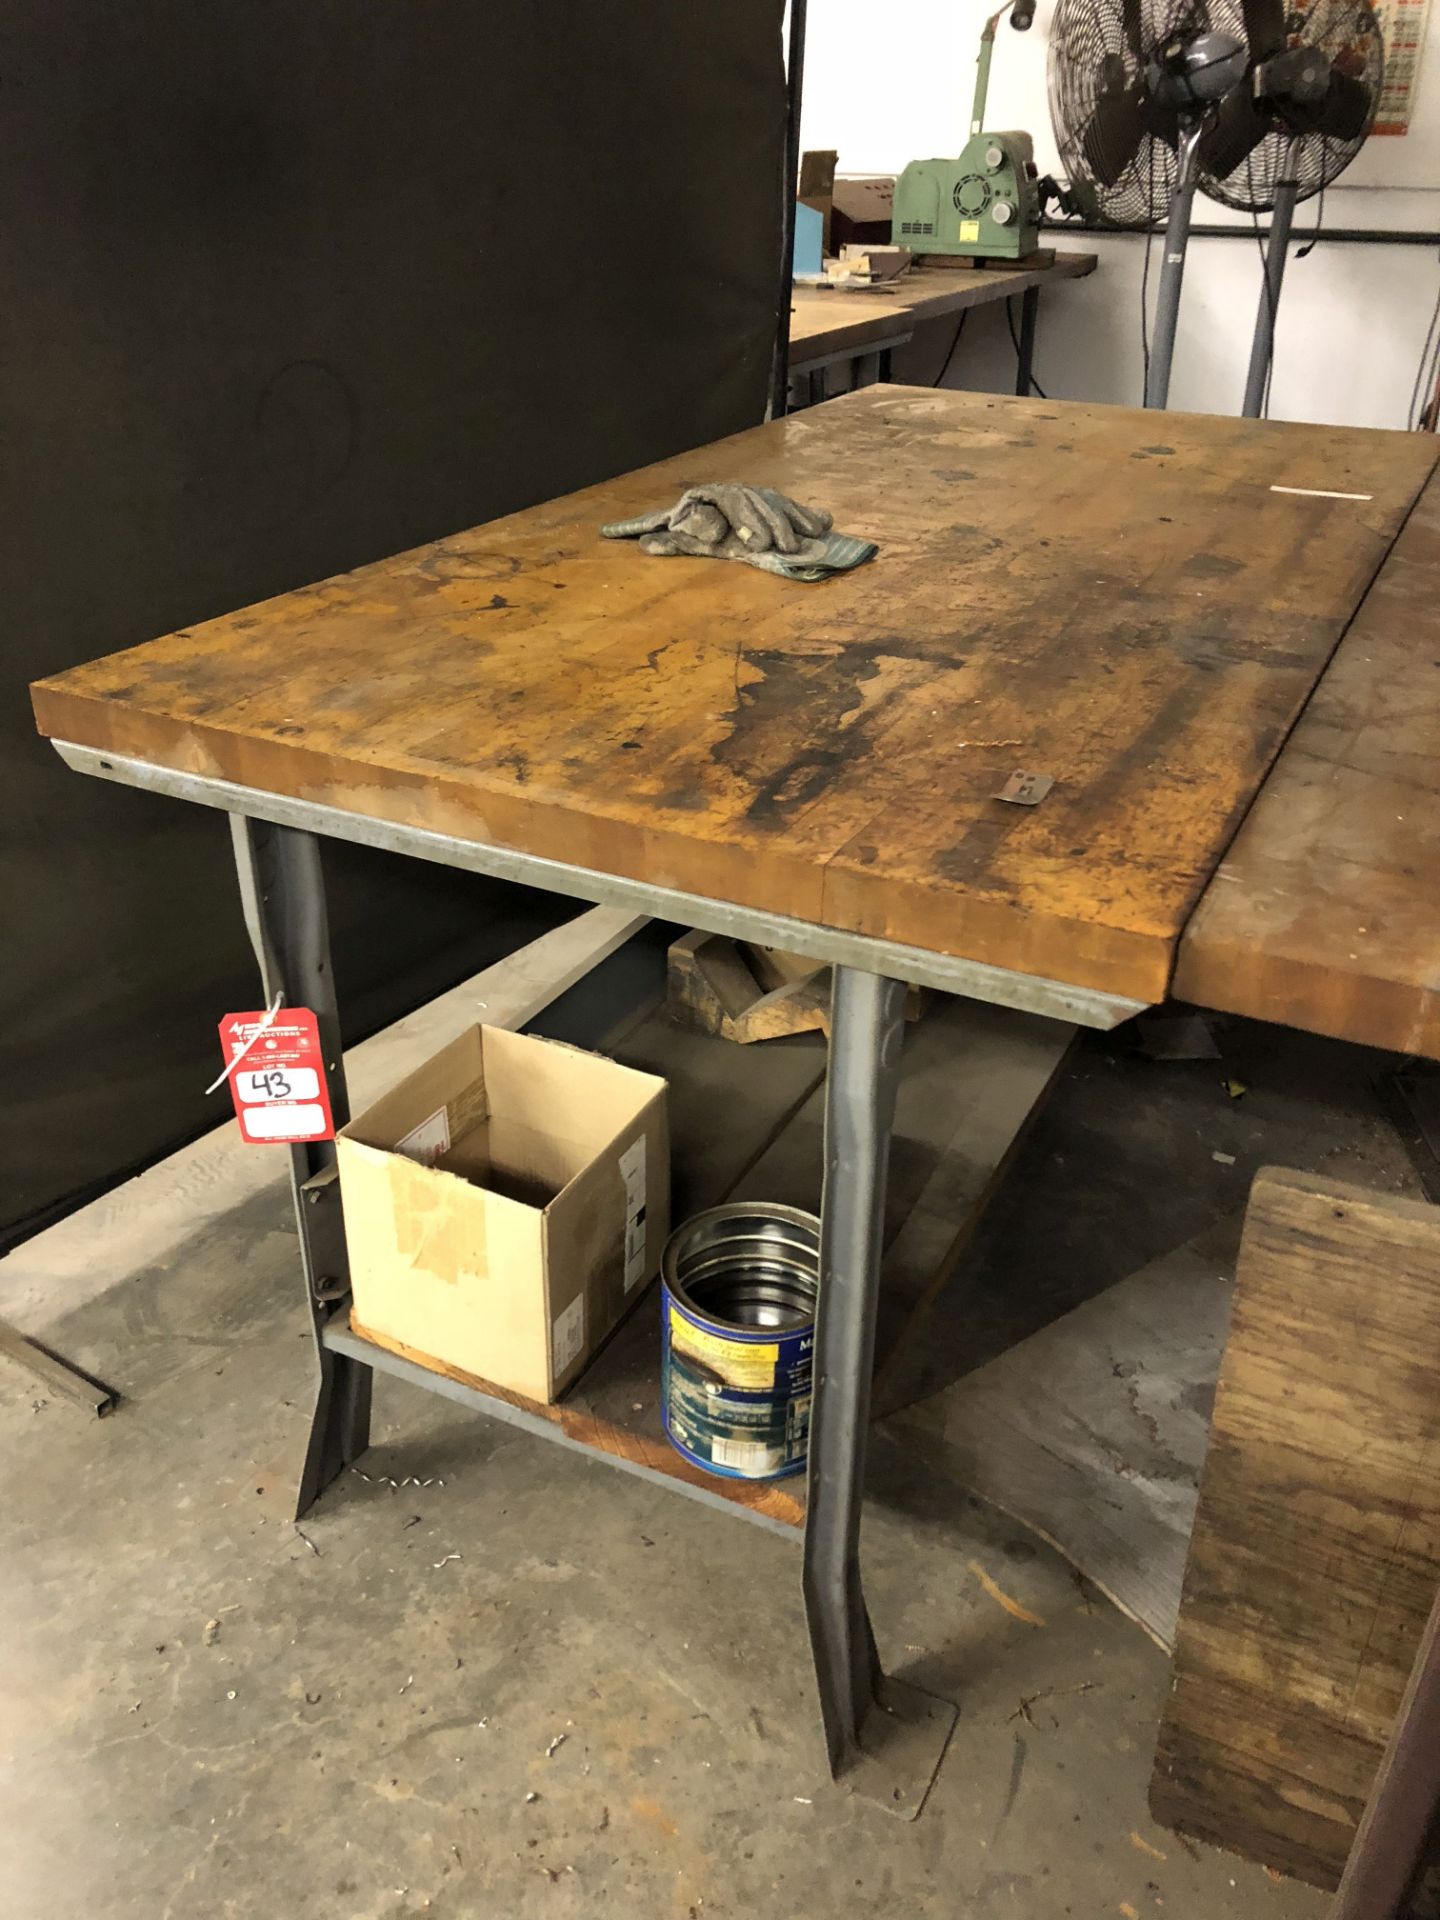 METAL WORK BENCH WITH WOOD TOP, 6' LONG x 3' WIDE x 34'' TALL [CONTENTS ON BENCH NOT INCLUDED] [ - Image 2 of 2